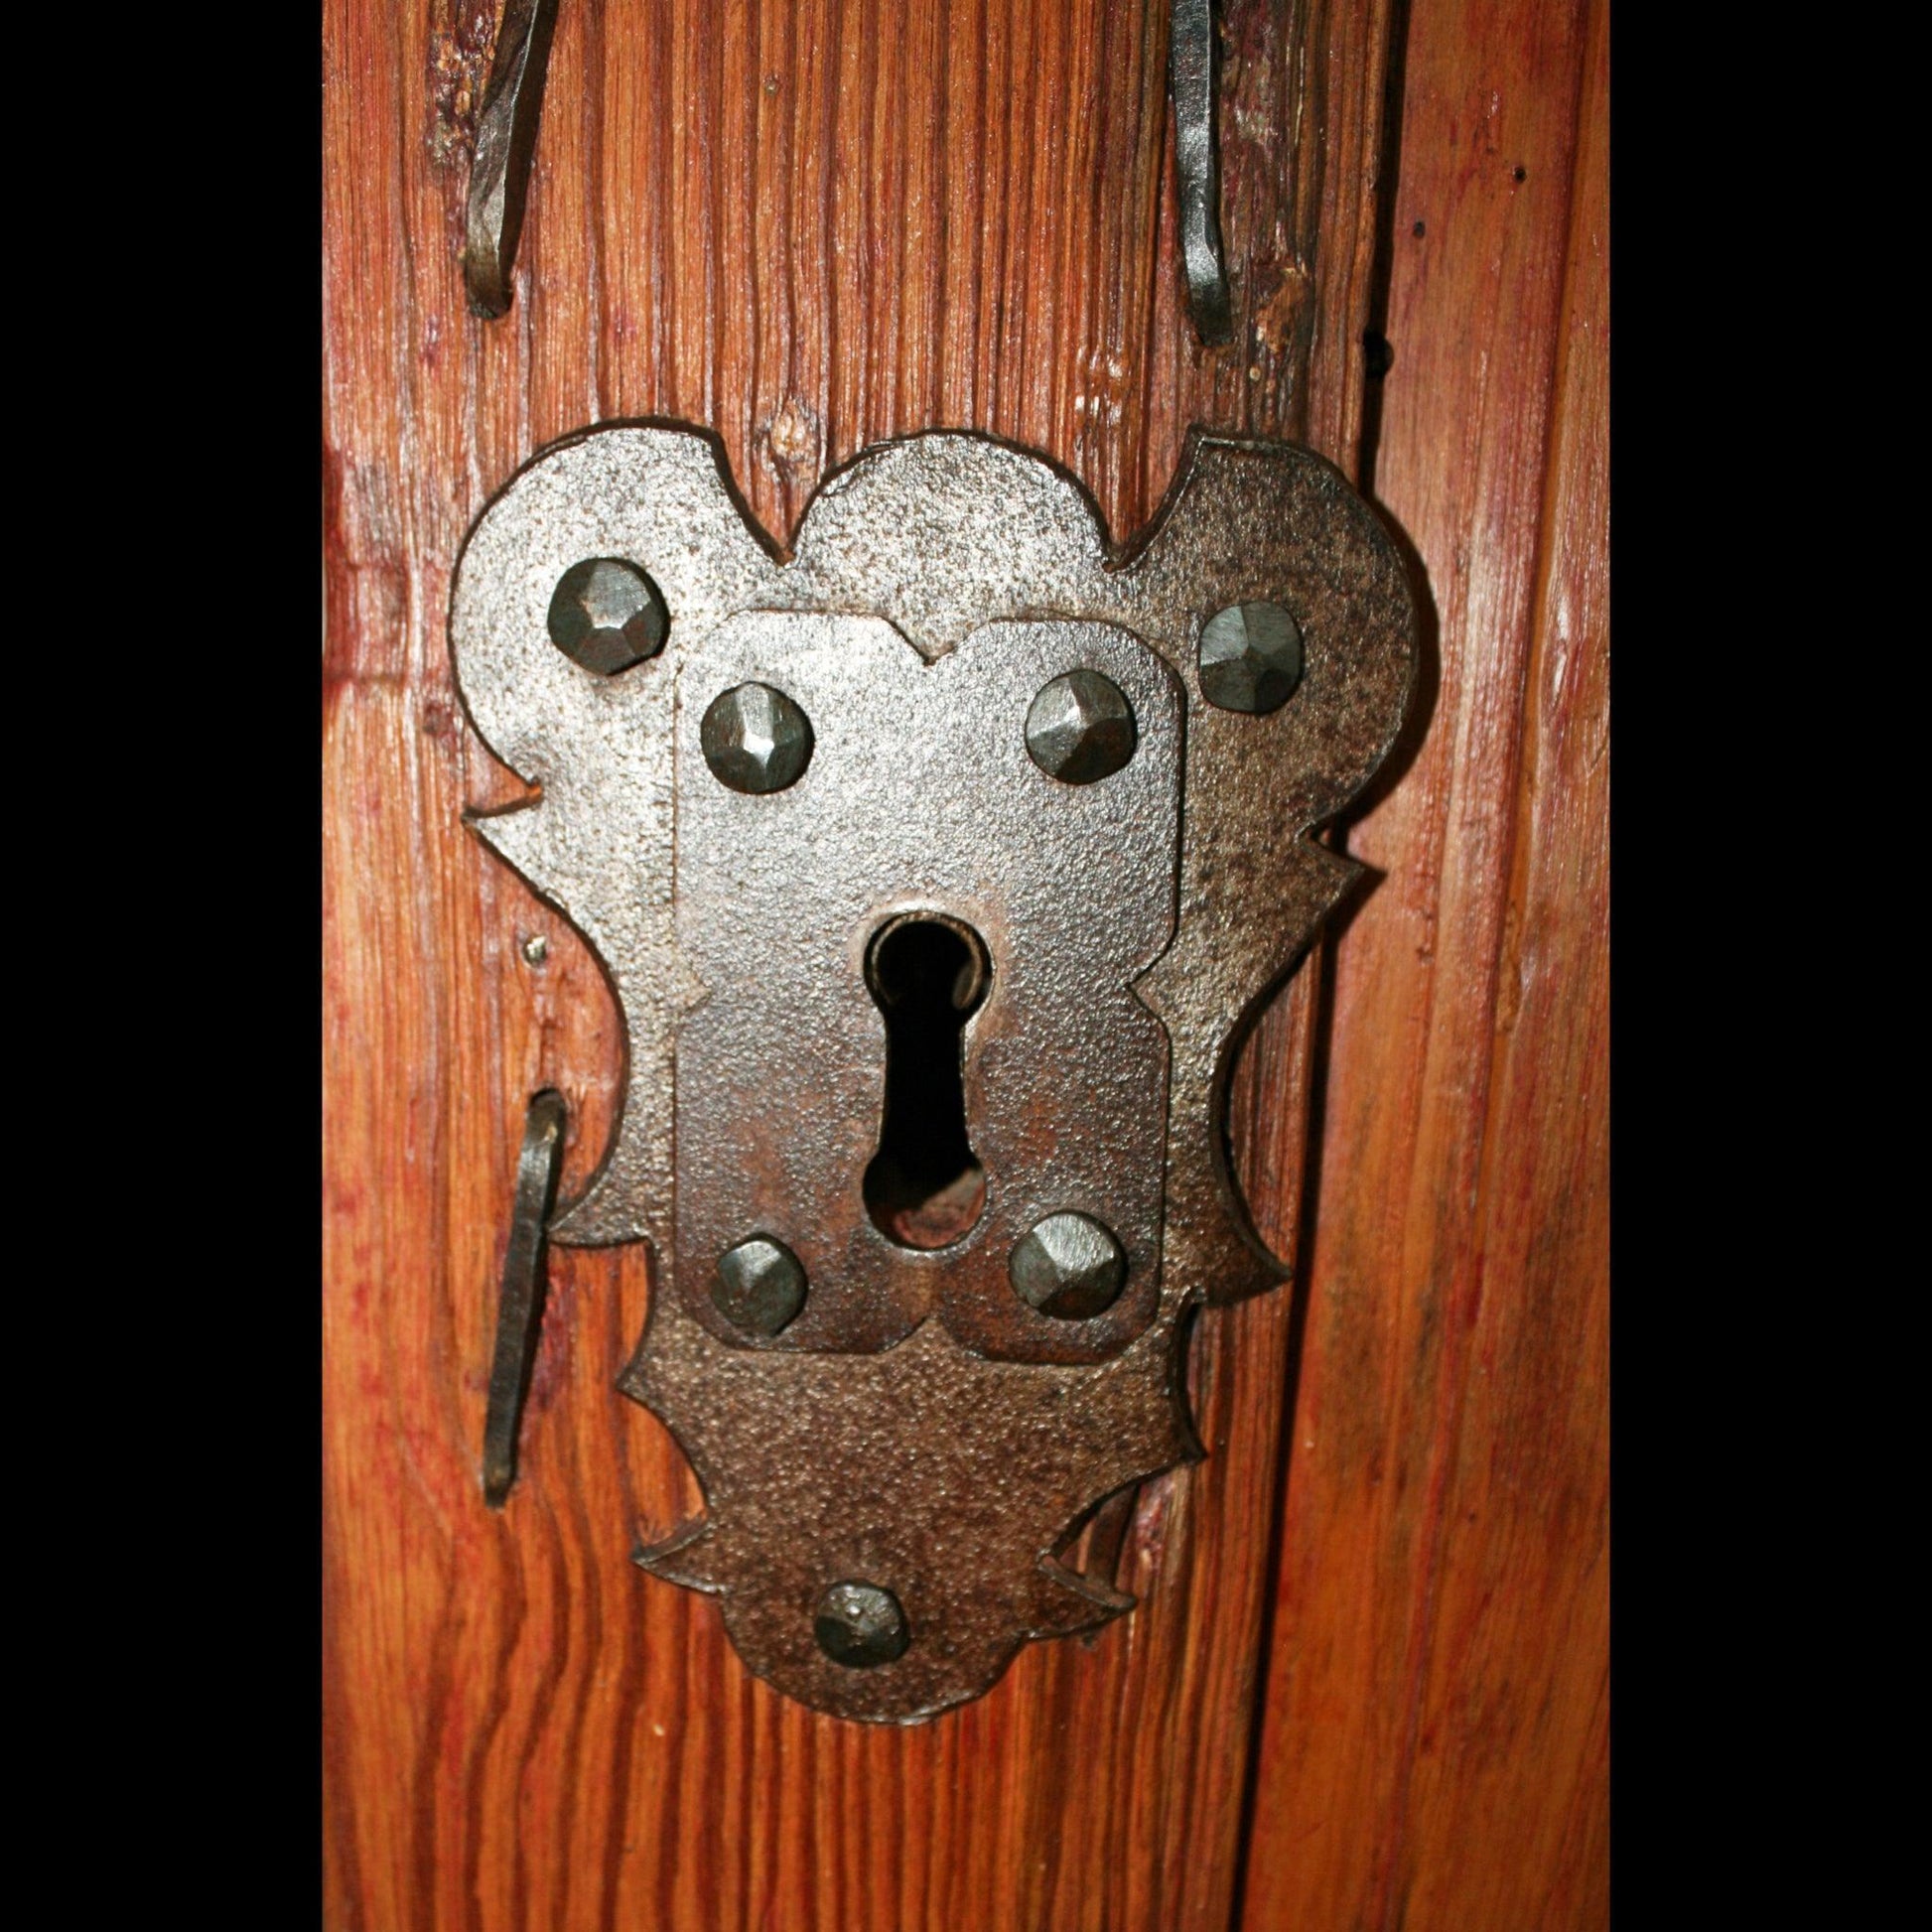 key-hole-and-staples-on-old-door-v-isenhower-photography - V. Isenhower Photography